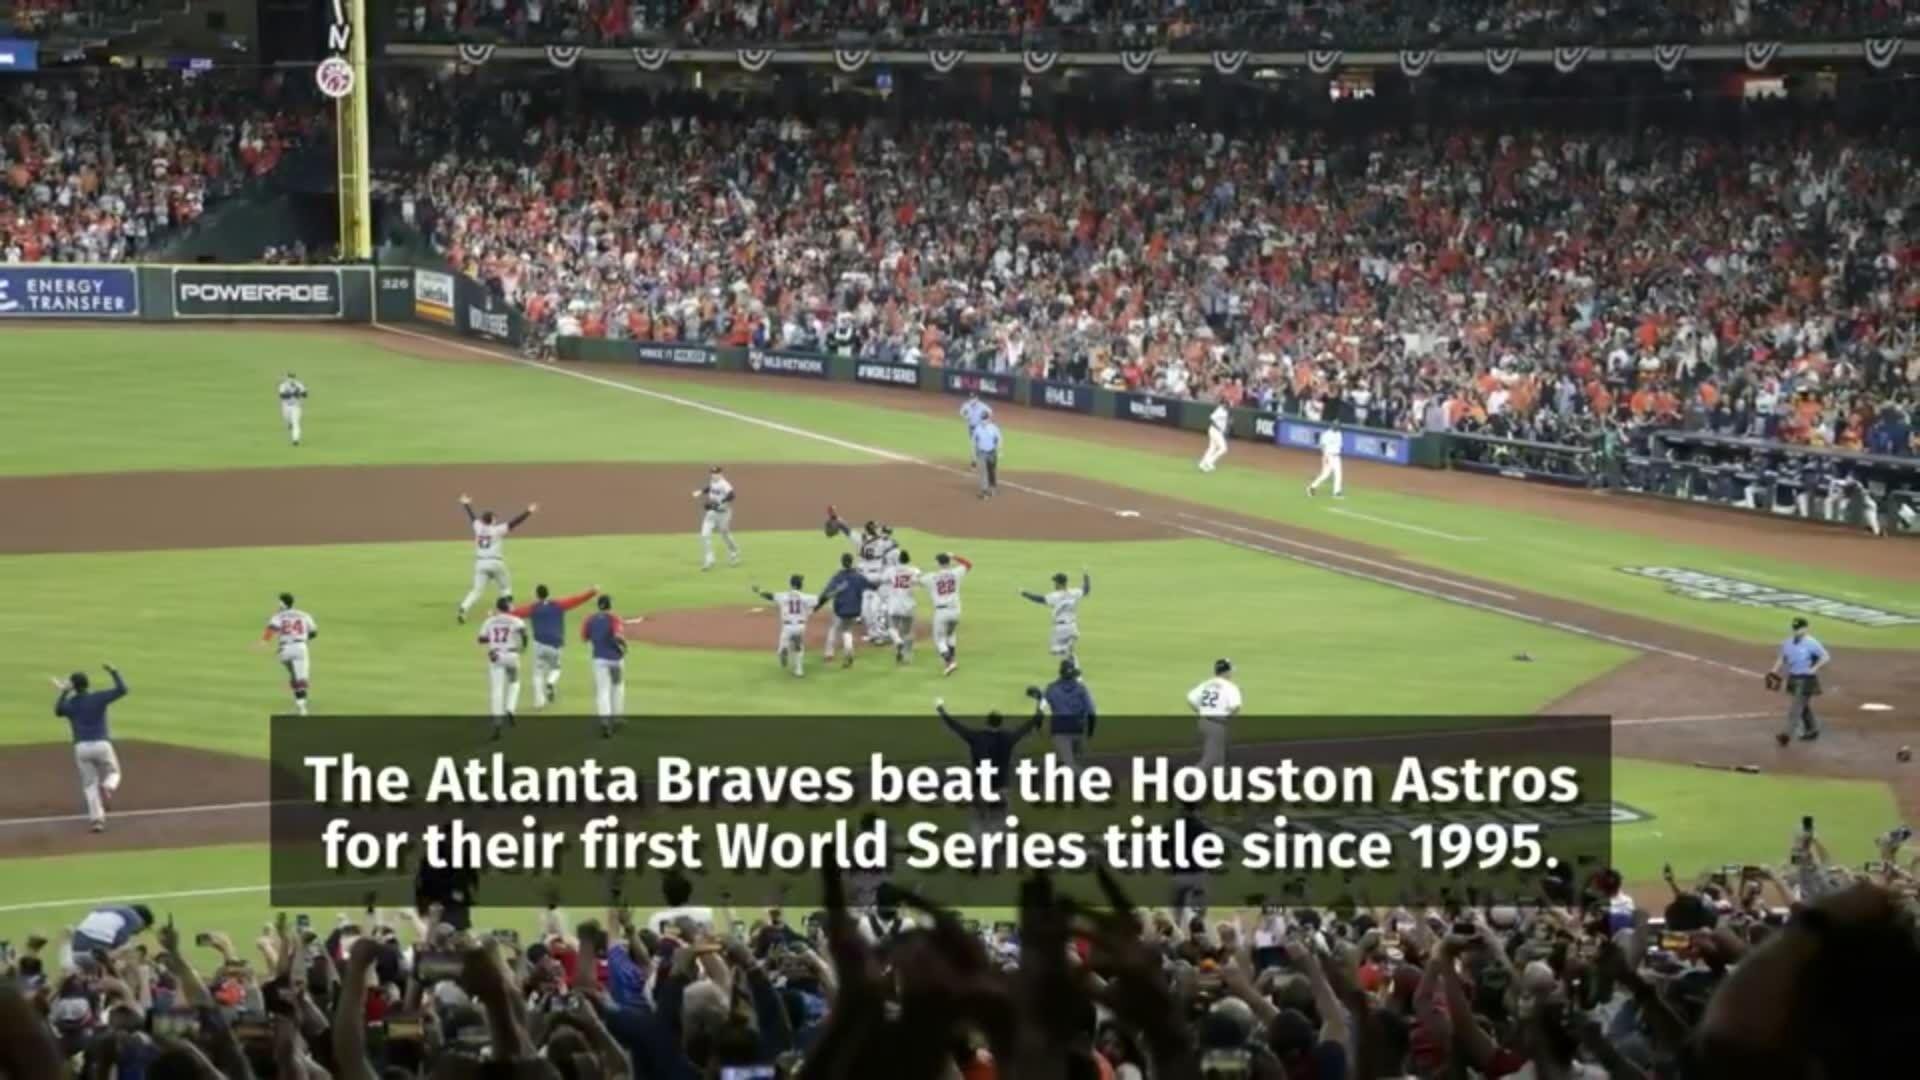 Braves win the World Series, beating Astros for first title since